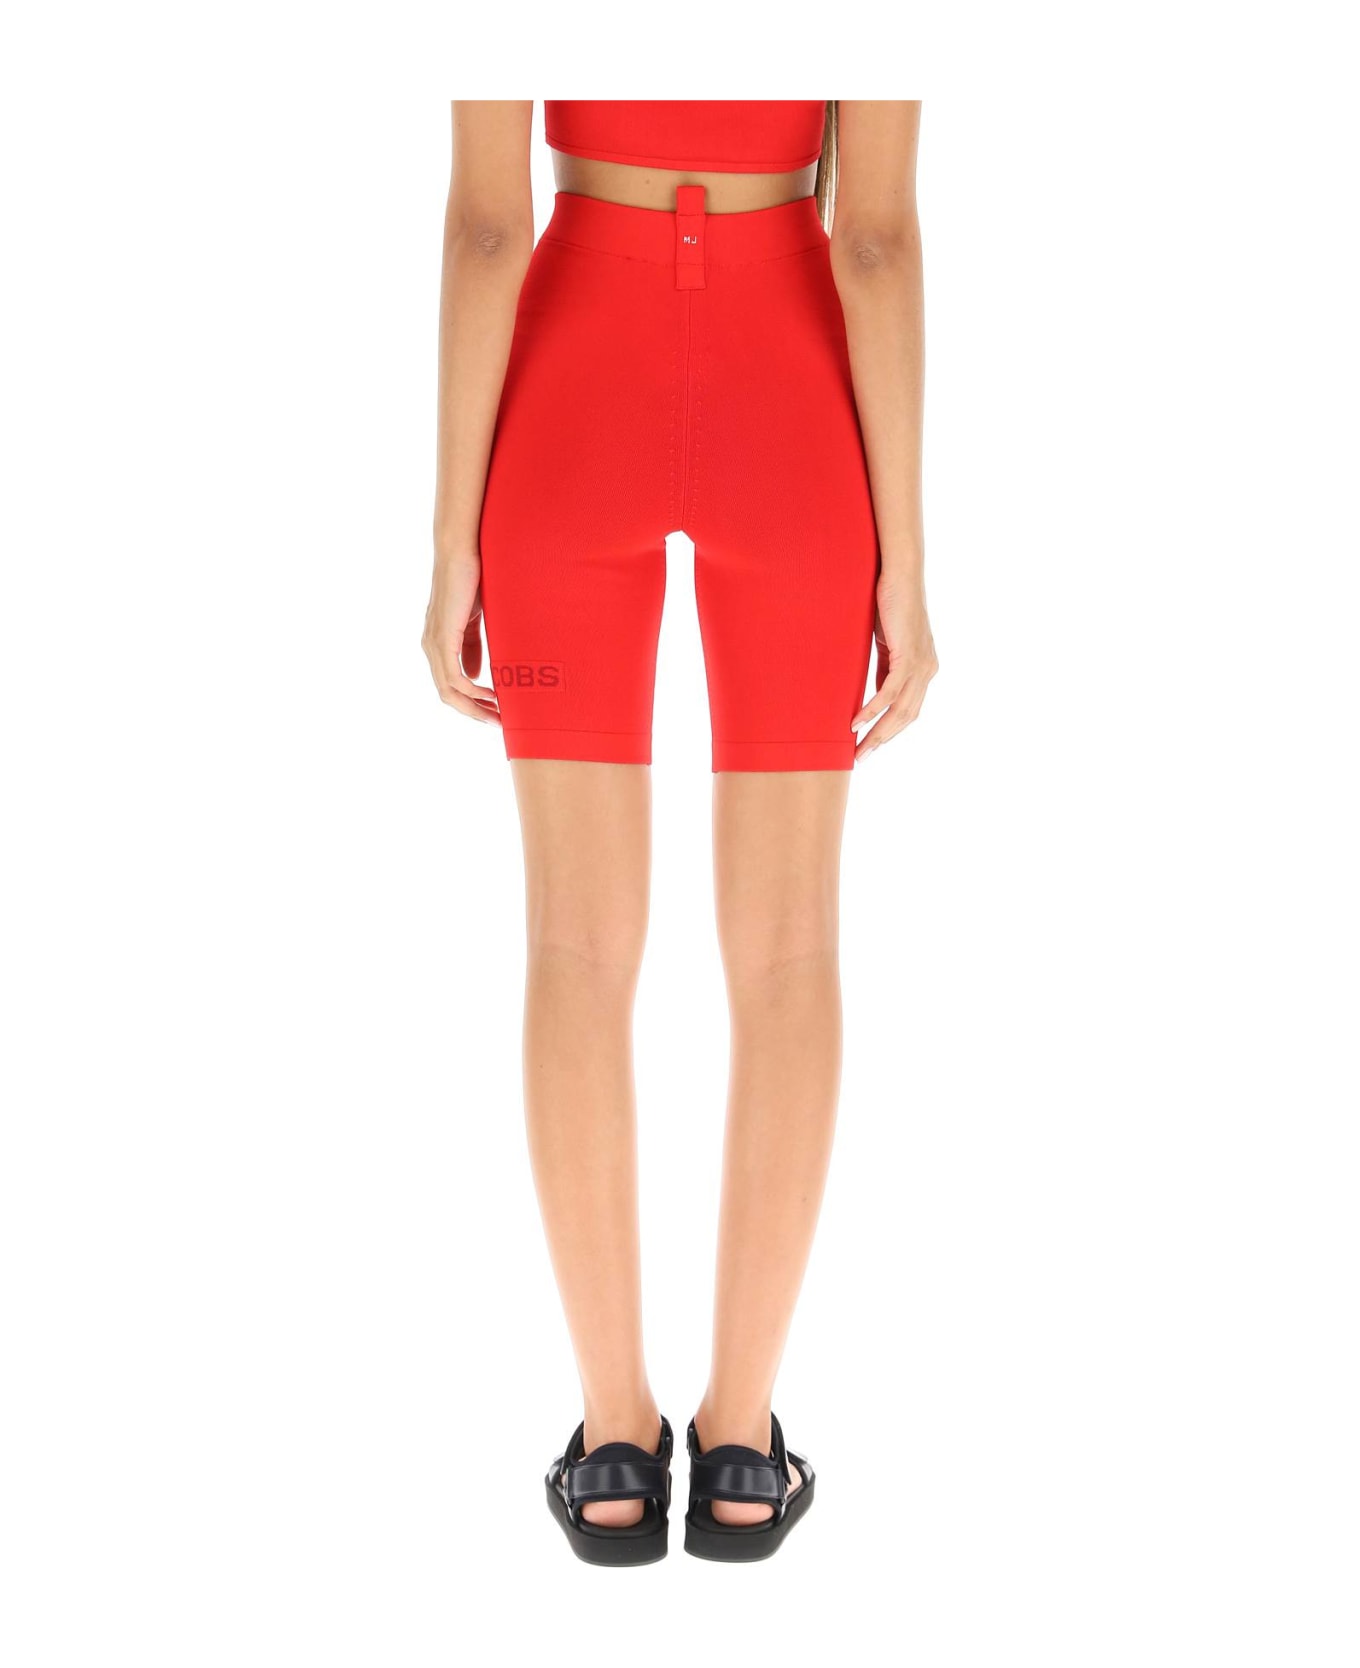 Marc Jacobs Sport Shorts - TRUE RED (Red)